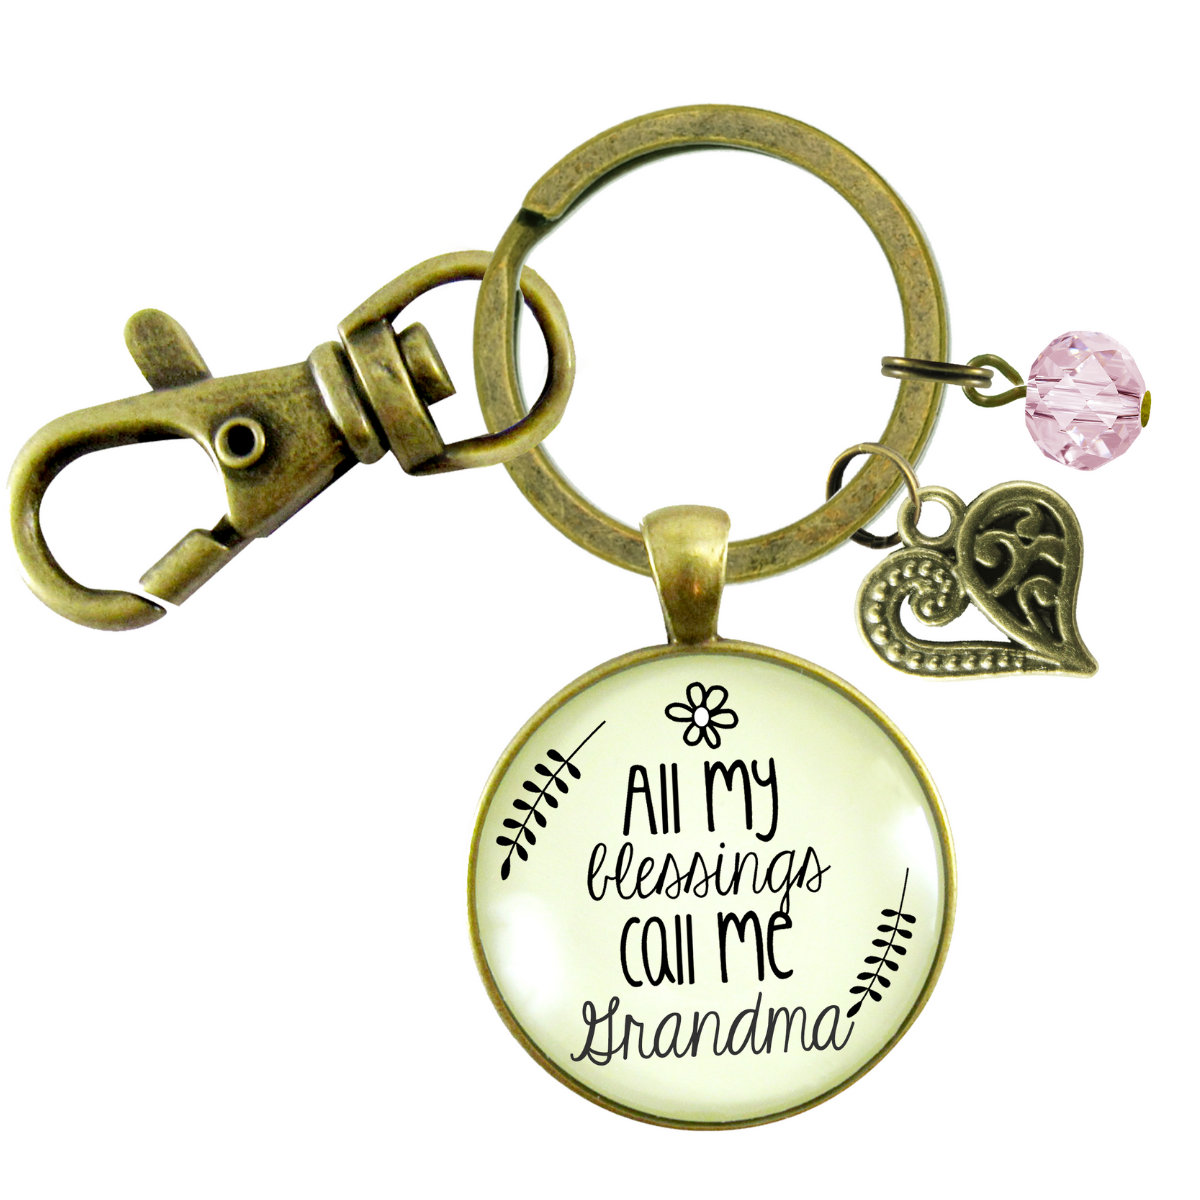 Grandma Keychain All My Blessings Grandmother Womens Family Gift Jewelry - Gutsy Goodness Handmade Jewelry;Grandma Keychain All My Blessings Grandmother Womens Family Gift Jewelry - Gutsy Goodness Handmade Jewelry Gifts